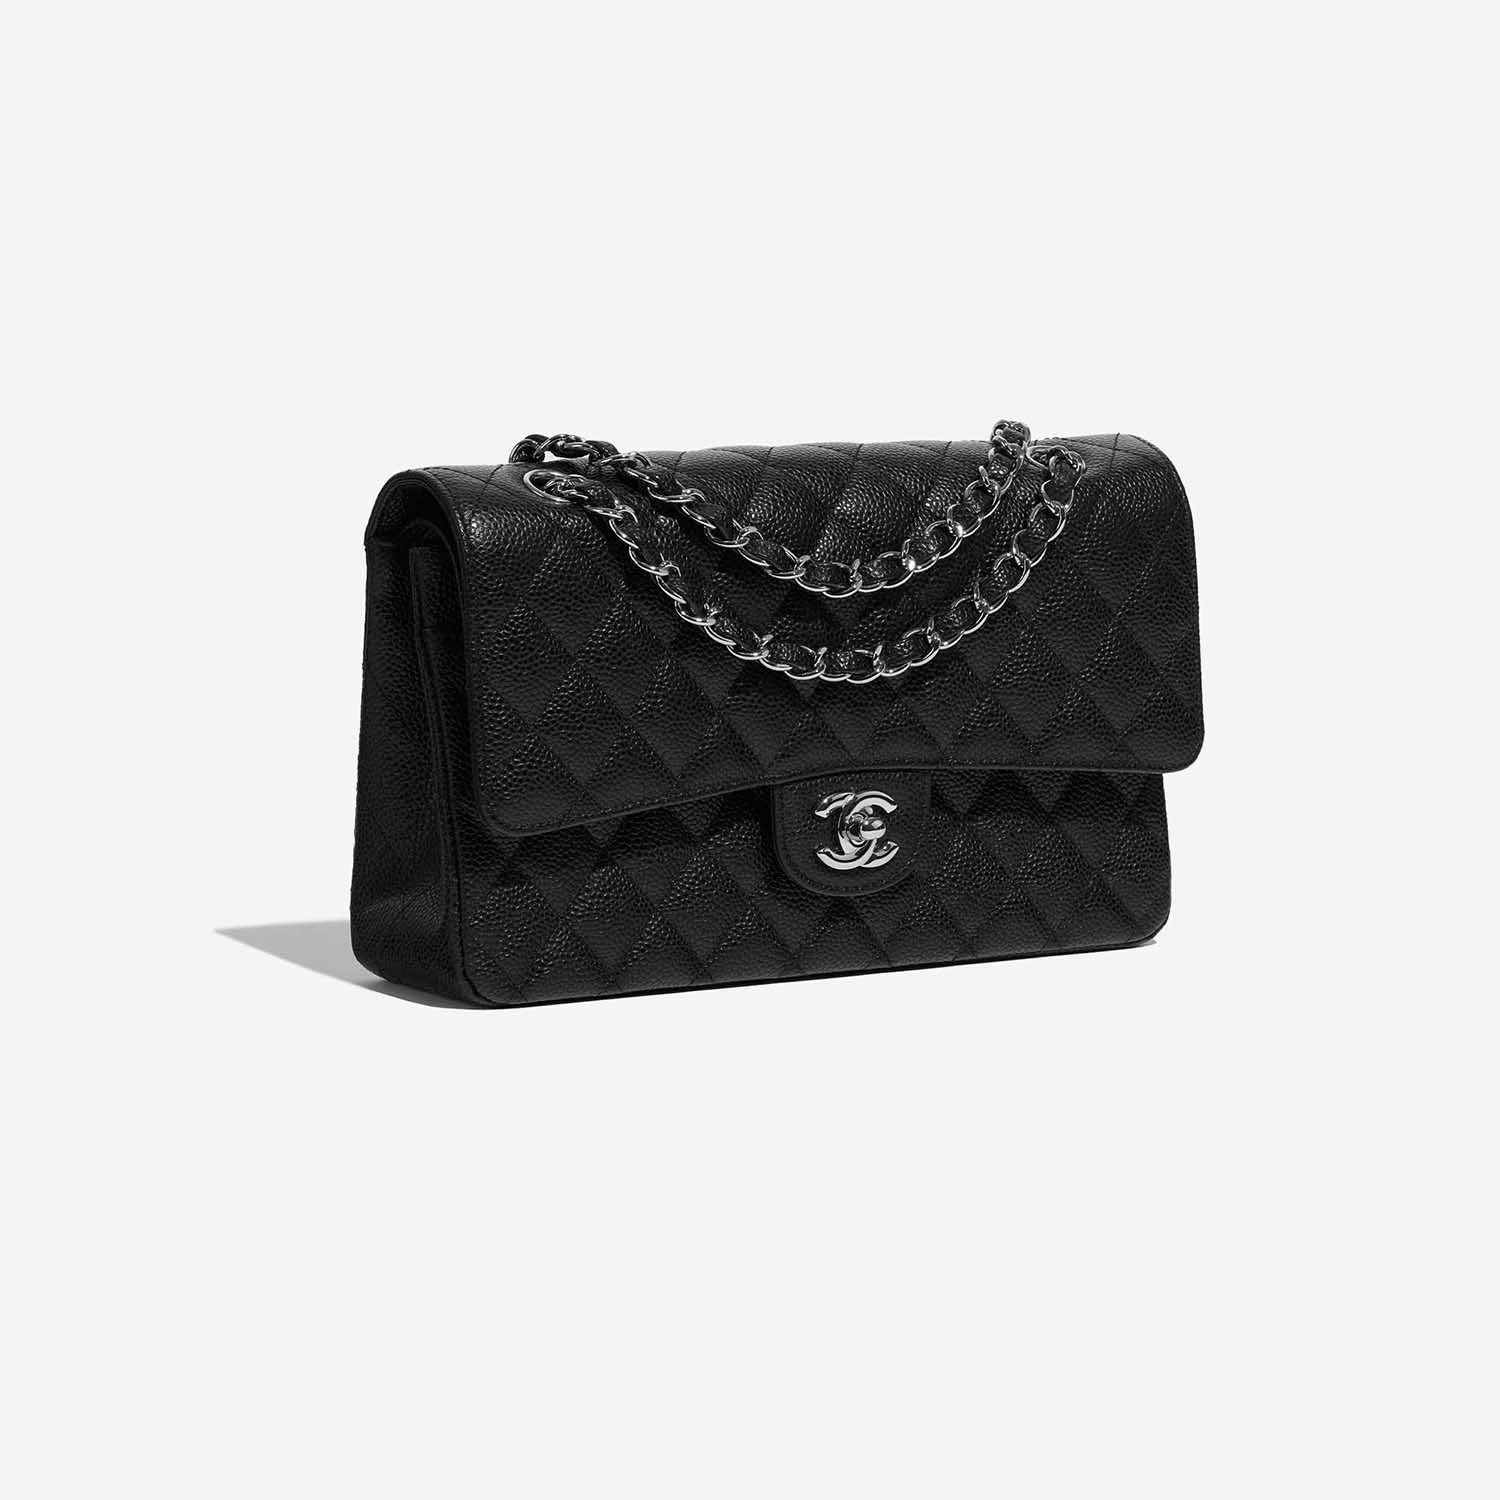 Medium Chanel bag - clothing & accessories - by owner - apparel sale -  craigslist